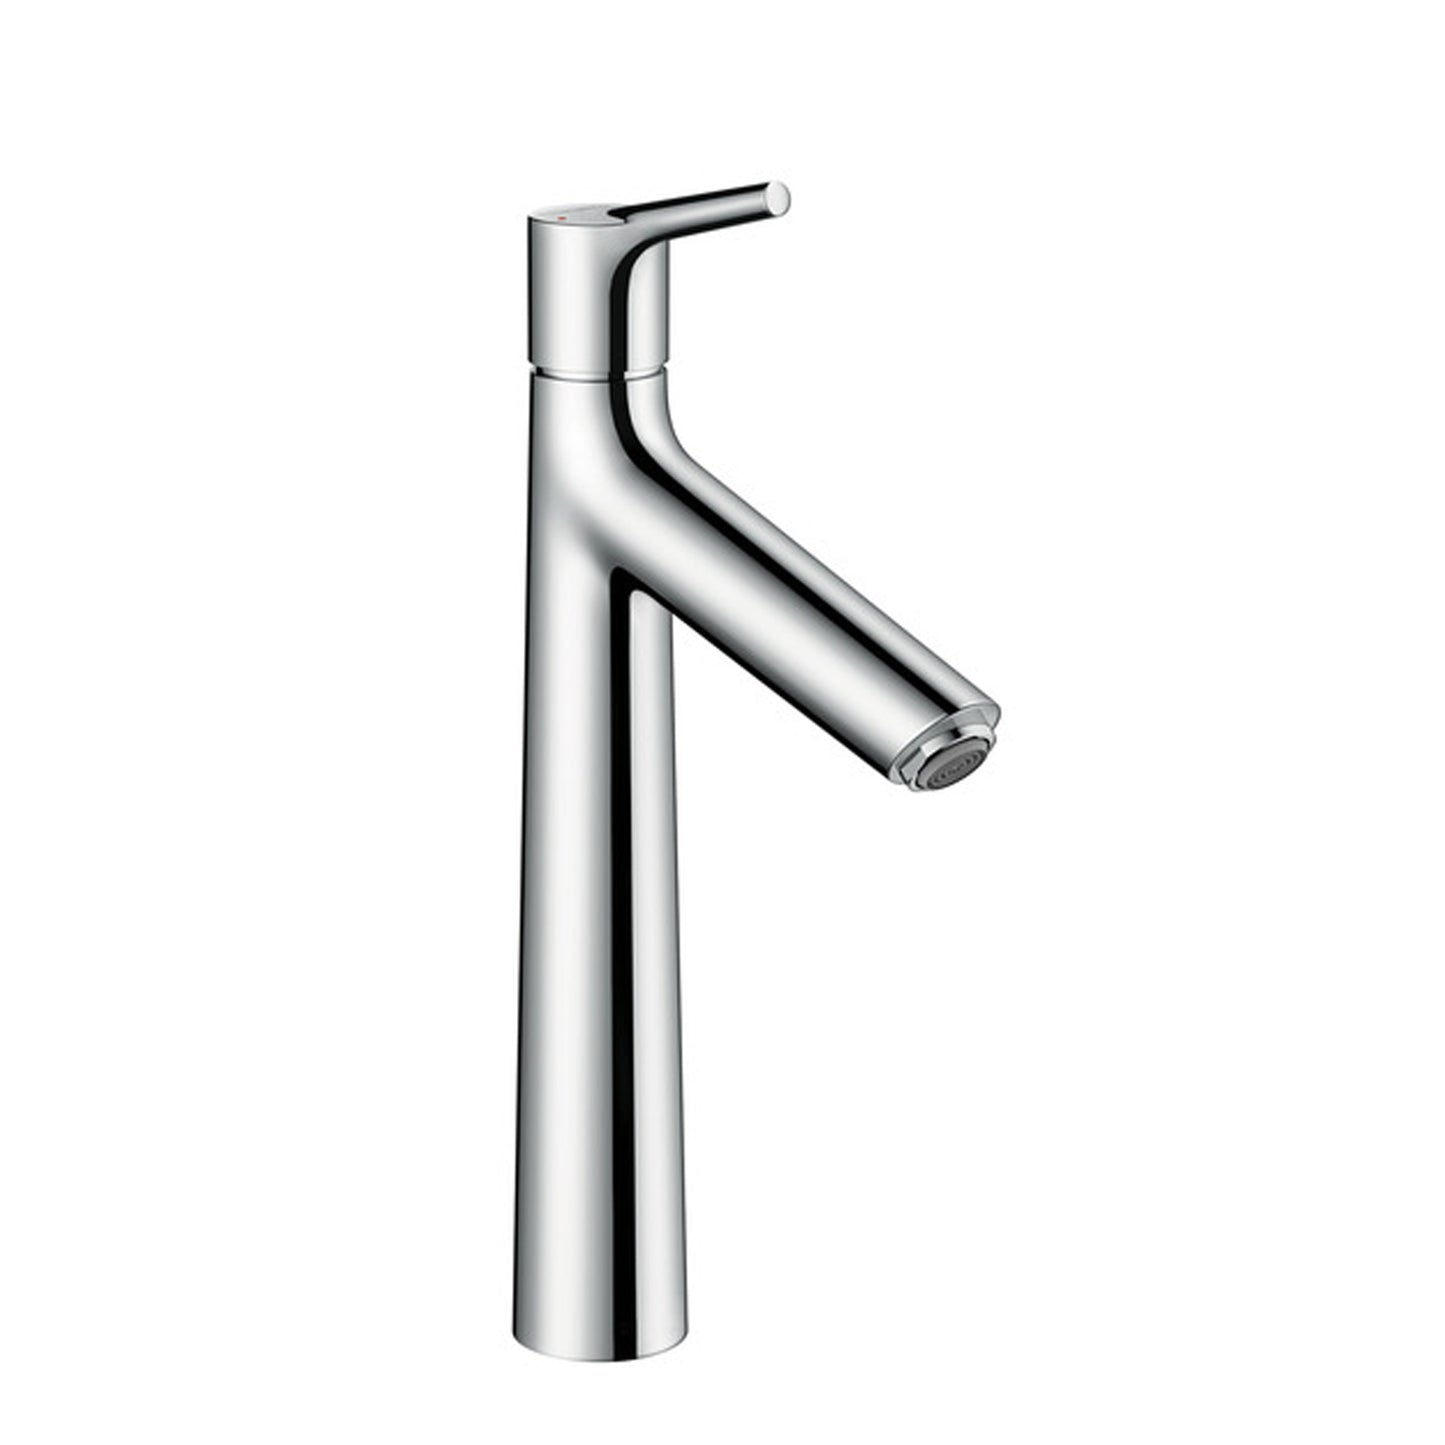 Hansgrohe Talis S Basin mixer 190 with pull rod waste set 72031.000